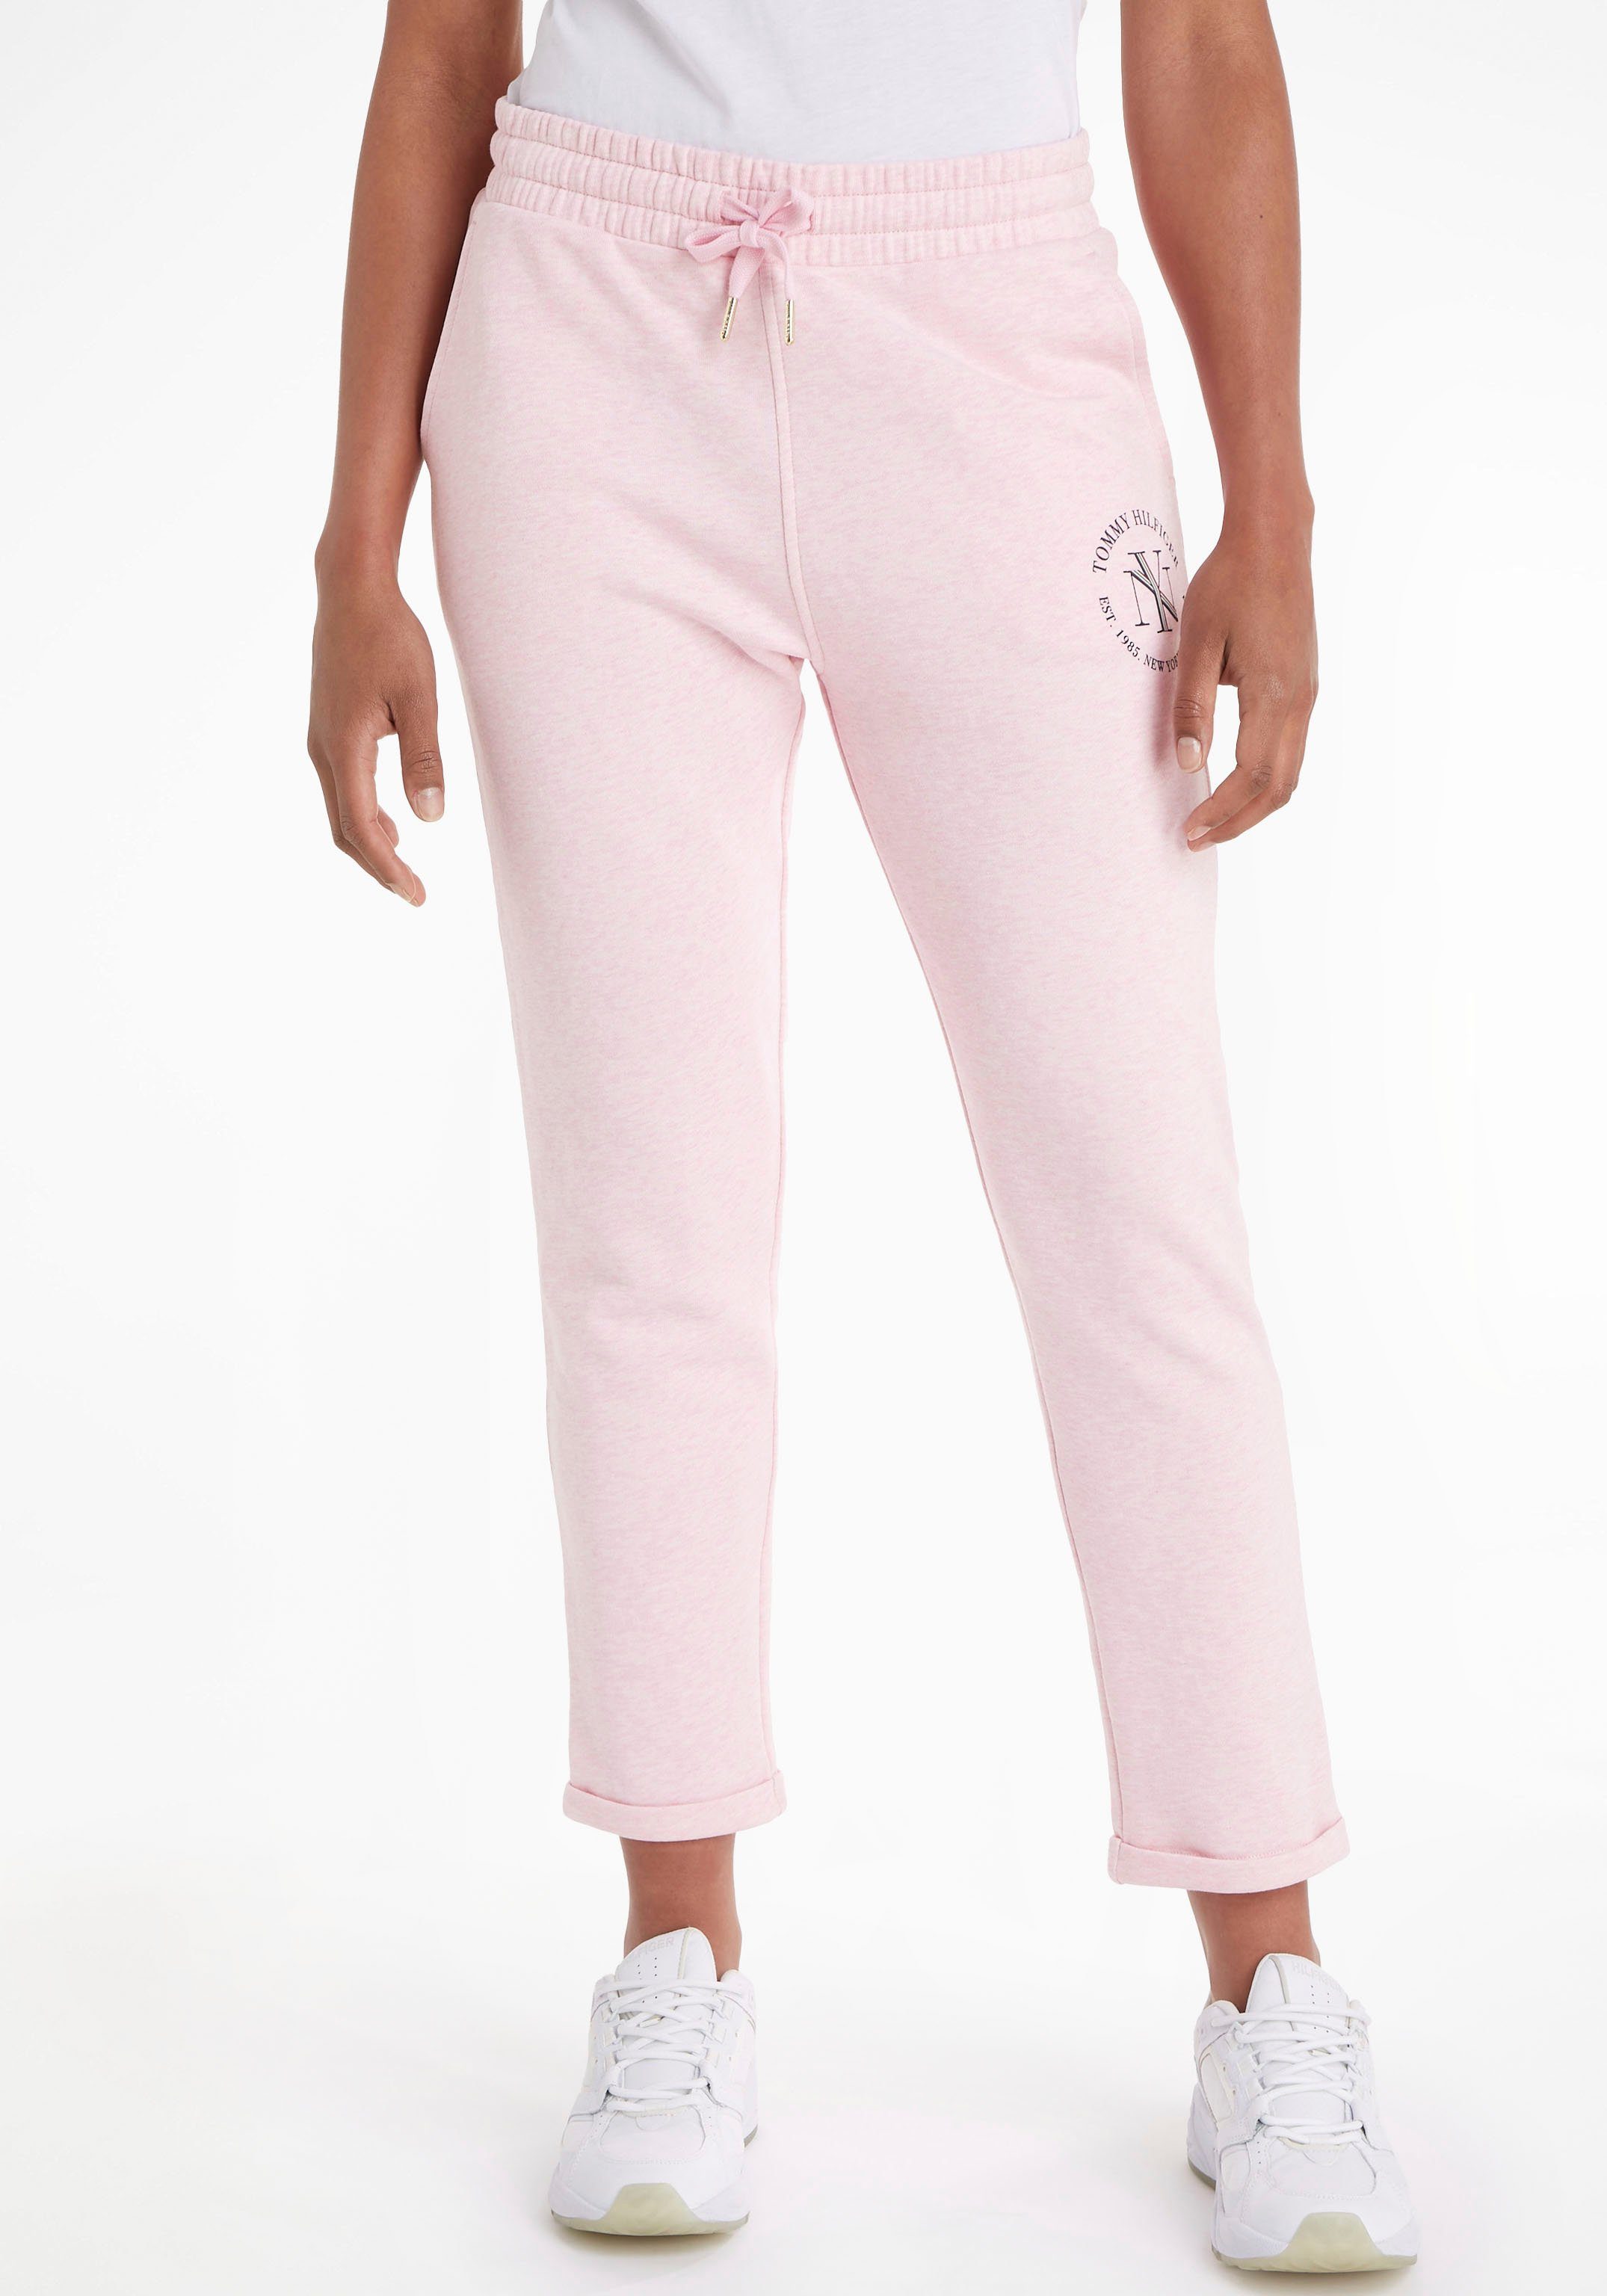 SWEATPANTS TAPERED mit Markenlabel Classic-Pink-Heather ROUNDALL Hilfiger Tommy Sweatpants Tommy NYC Hilfiger